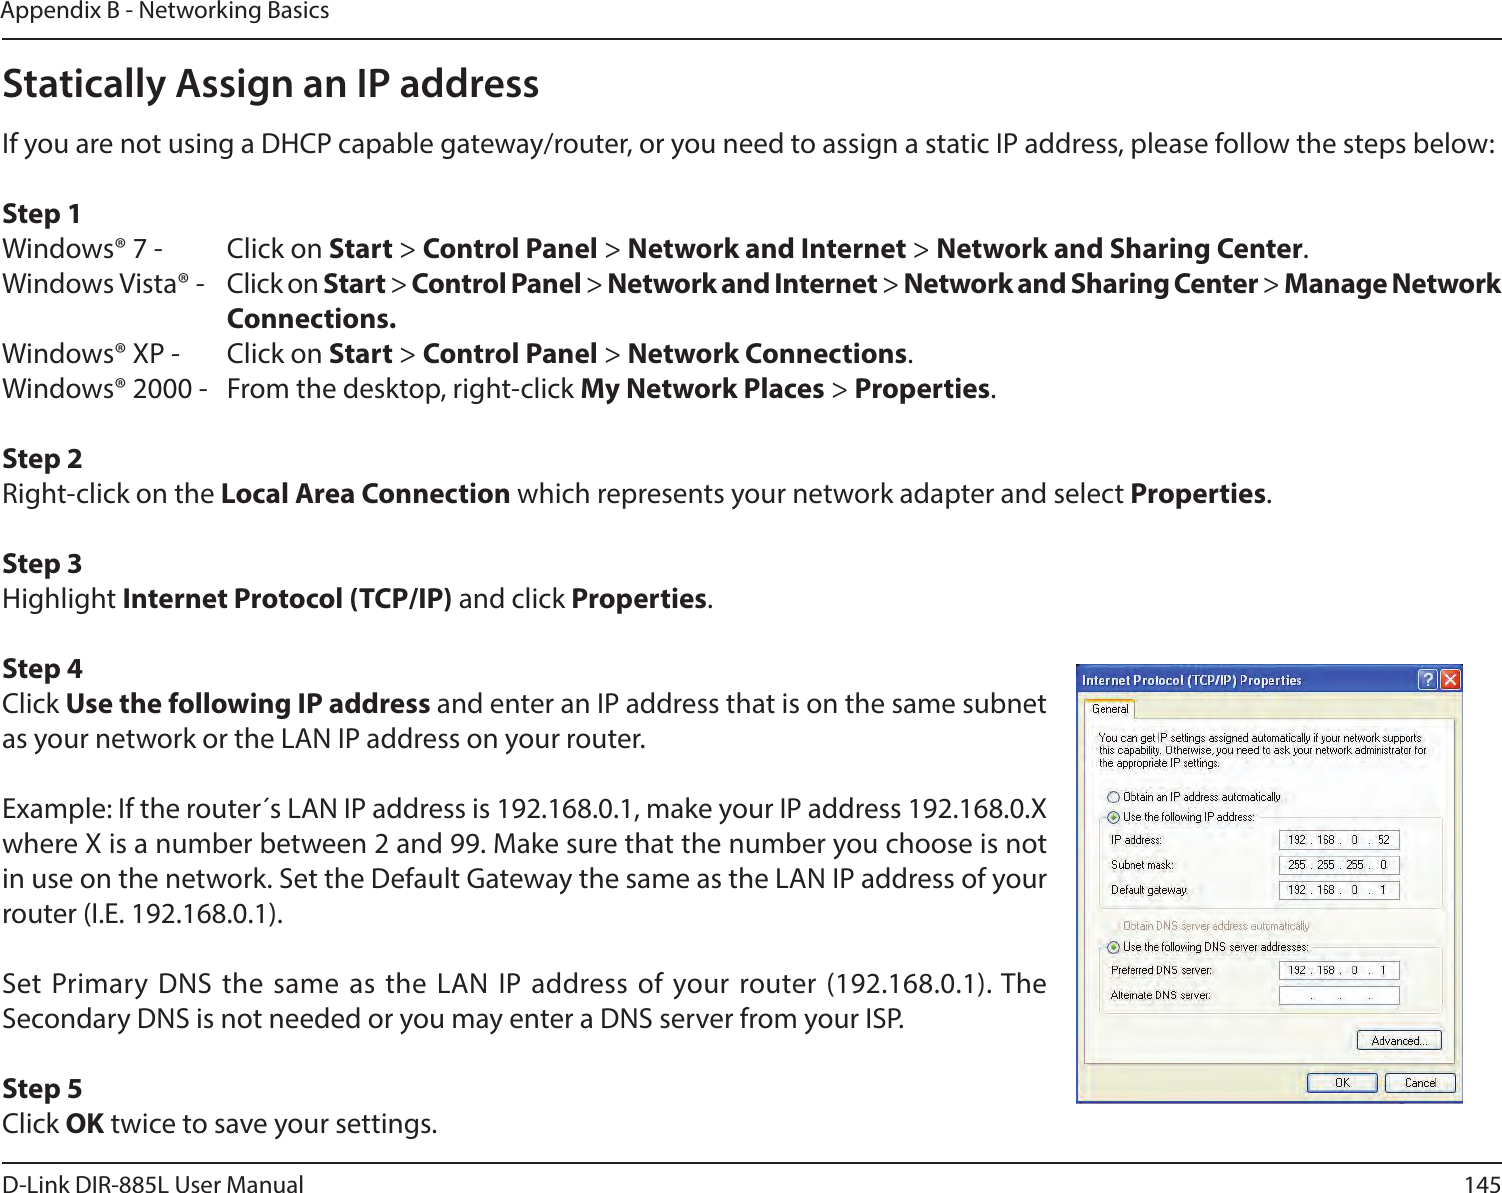 145D-Link DIR-885L User ManualAppendix B - Networking BasicsStatically Assign an IP addressIf you are not using a DHCP capable gateway/router, or you need to assign a static IP address, please follow the steps below:Step 1Windows® 7 -  Click on Start &gt; Control Panel &gt; Network and Internet &gt; Network and Sharing Center.Windows Vista® -  Click on Start &gt; Control Panel &gt; Network and Internet &gt; Network and Sharing Center &gt; Manage Network    Connections.Windows® XP -  Click on Start &gt; Control Panel &gt; Network Connections.Windows® 2000 -  From the desktop, right-click My Network Places &gt; Properties.Step 2Right-click on the Local Area Connection which represents your network adapter and select Properties.Step 3Highlight Internet Protocol (TCP/IP) and click Properties.Step 4Click Use the following IP address and enter an IP address that is on the same subnet as your network or the LAN IP address on your router. Example: If the router´s LAN IP address is 192.168.0.1, make your IP address 192.168.0.X where X is a number between 2 and 99. Make sure that the number you choose is not in use on the network. Set the Default Gateway the same as the LAN IP address of your router (I.E. 192.168.0.1). Set Primary DNS the same as the LAN IP address of your router (192.168.0.1). The Secondary DNS is not needed or you may enter a DNS server from your ISP.Step 5Click OK twice to save your settings.